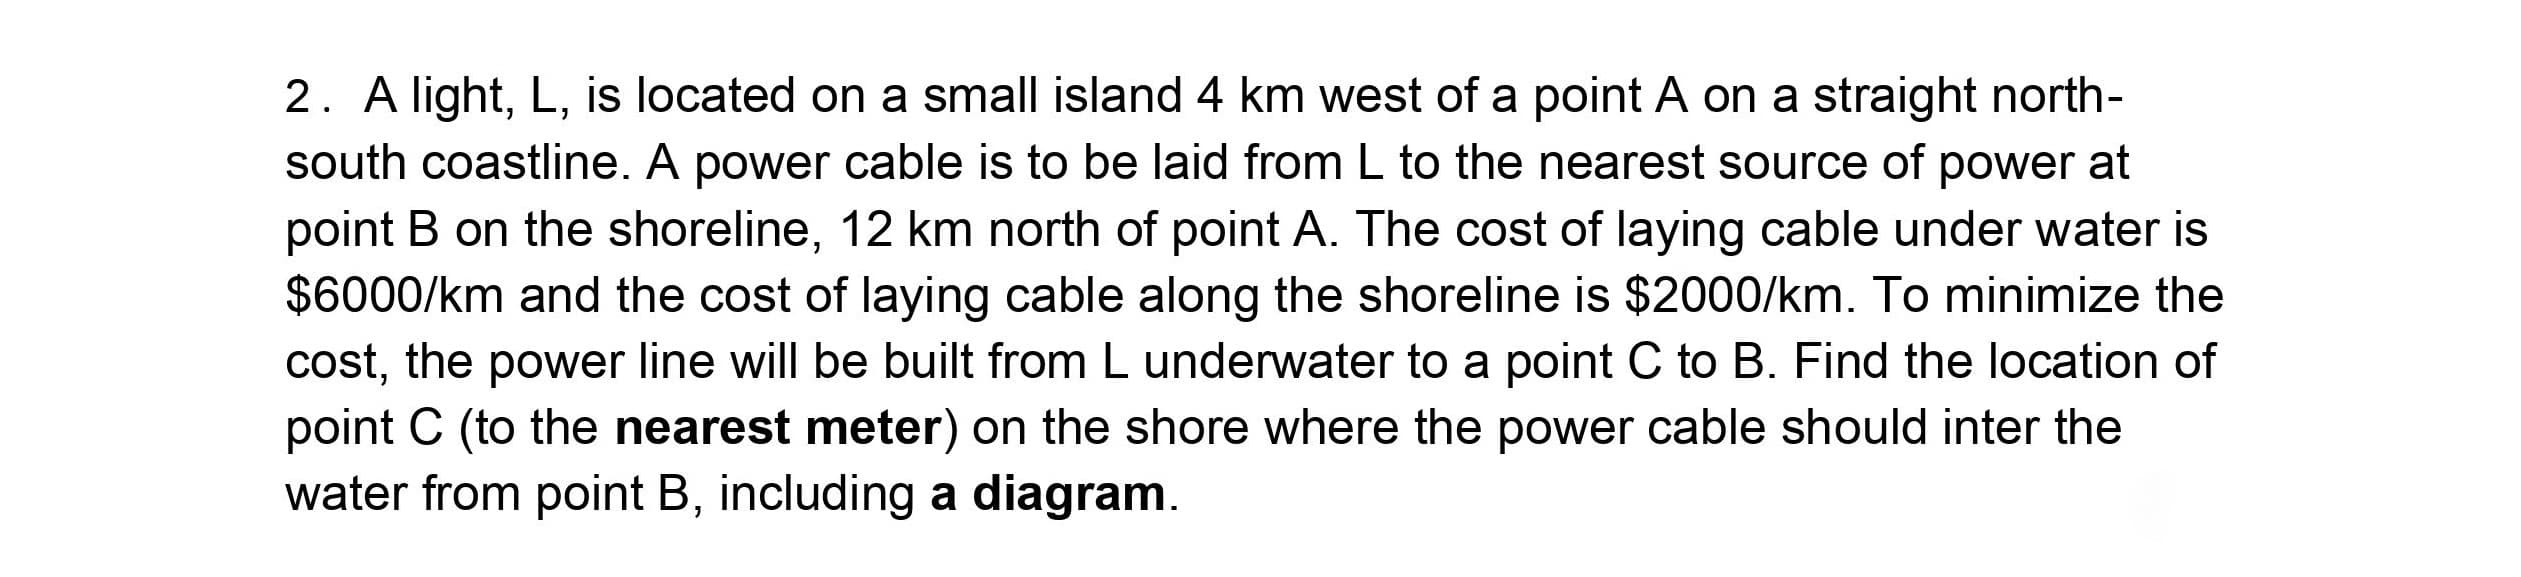 2. A light, L, is located on a small island 4 km west of a point A on a straight north-
south coastline. A power cable is to be laid from L to the nearest source of power at
point B on the shoreline, 12 km north of point A. The cost of laying cable under water is
$6000/km and the cost of laying cable along the shoreline is $2000/km. To minimize the
cost, the power line will be built from L underwater to a point C to B. Find the location of
point C (to the nearest meter) on the shore where the power cable should inter the
water from point B, including a diagram.
